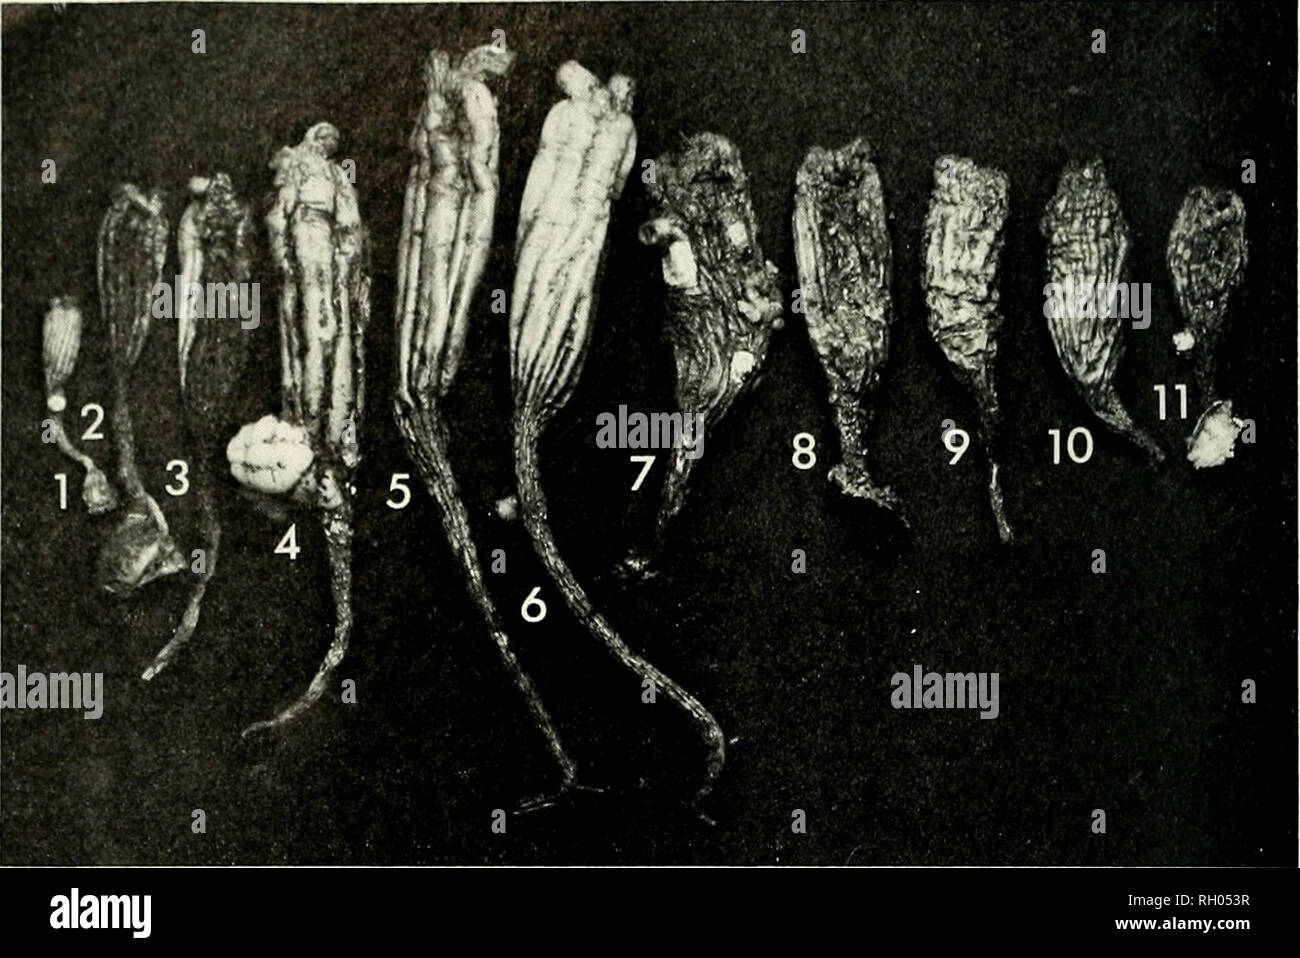 . Bulletin. Science; Natural history; Natural history. 98 III 111 ll sol ////A' ( tLIEORNIA ACADEMY OF SCIENCES VOLUME 7/. Figure 4. Styelid ascidians found growing together, Santa Barbara harbor, California. 1-6, Styela montcreyensis (specimen 4 bearing an 5. plicata). 7-11, Stycla clava. where it deals with the placement of the stomach and intestine, is generally accurate, though it does not always convey the range of variation to be expected. The following account augments or modifies only those portions of the description which require this. External features.—Our largest specimens reach Stock Photo